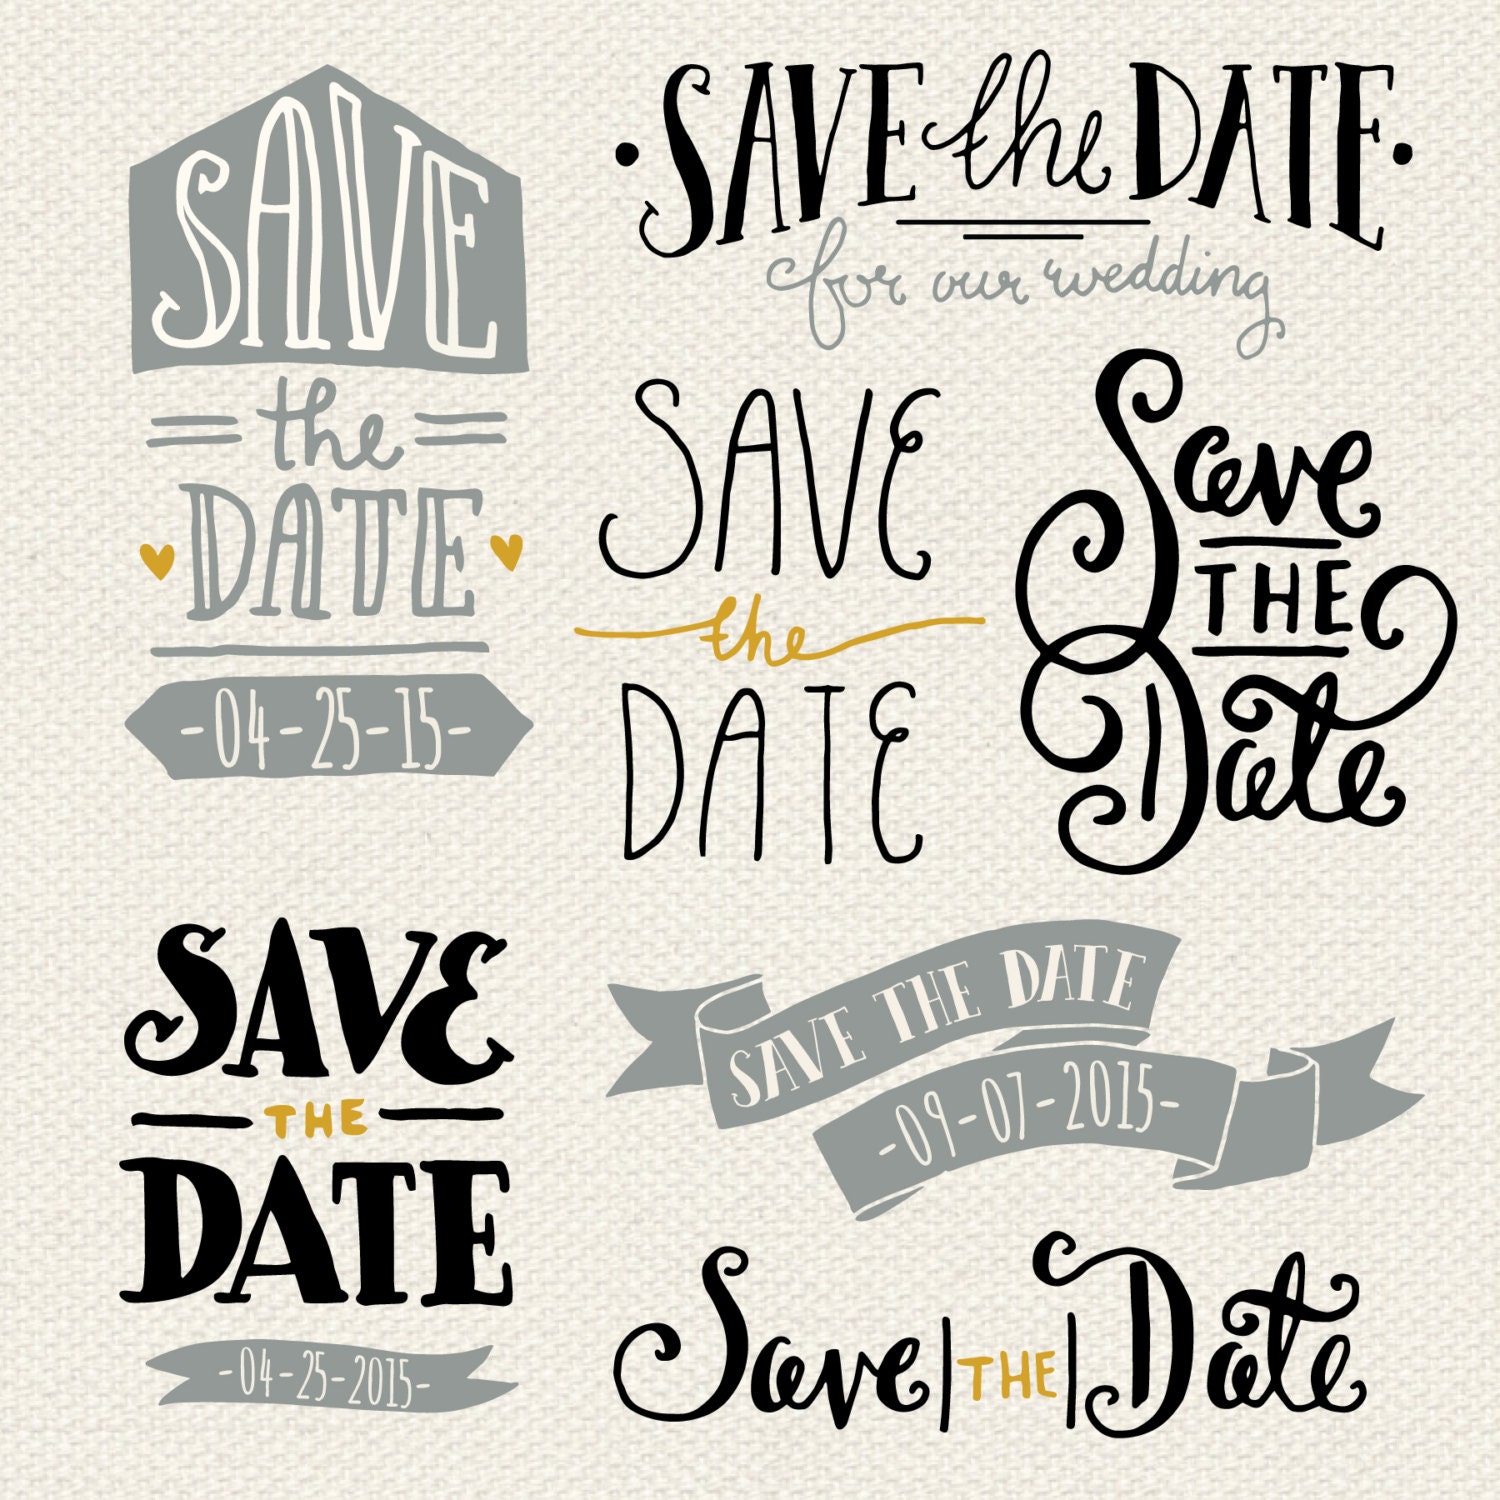 Download Save the Date Overlays 1 // Photoshop PSD // by thePENandBRUSH